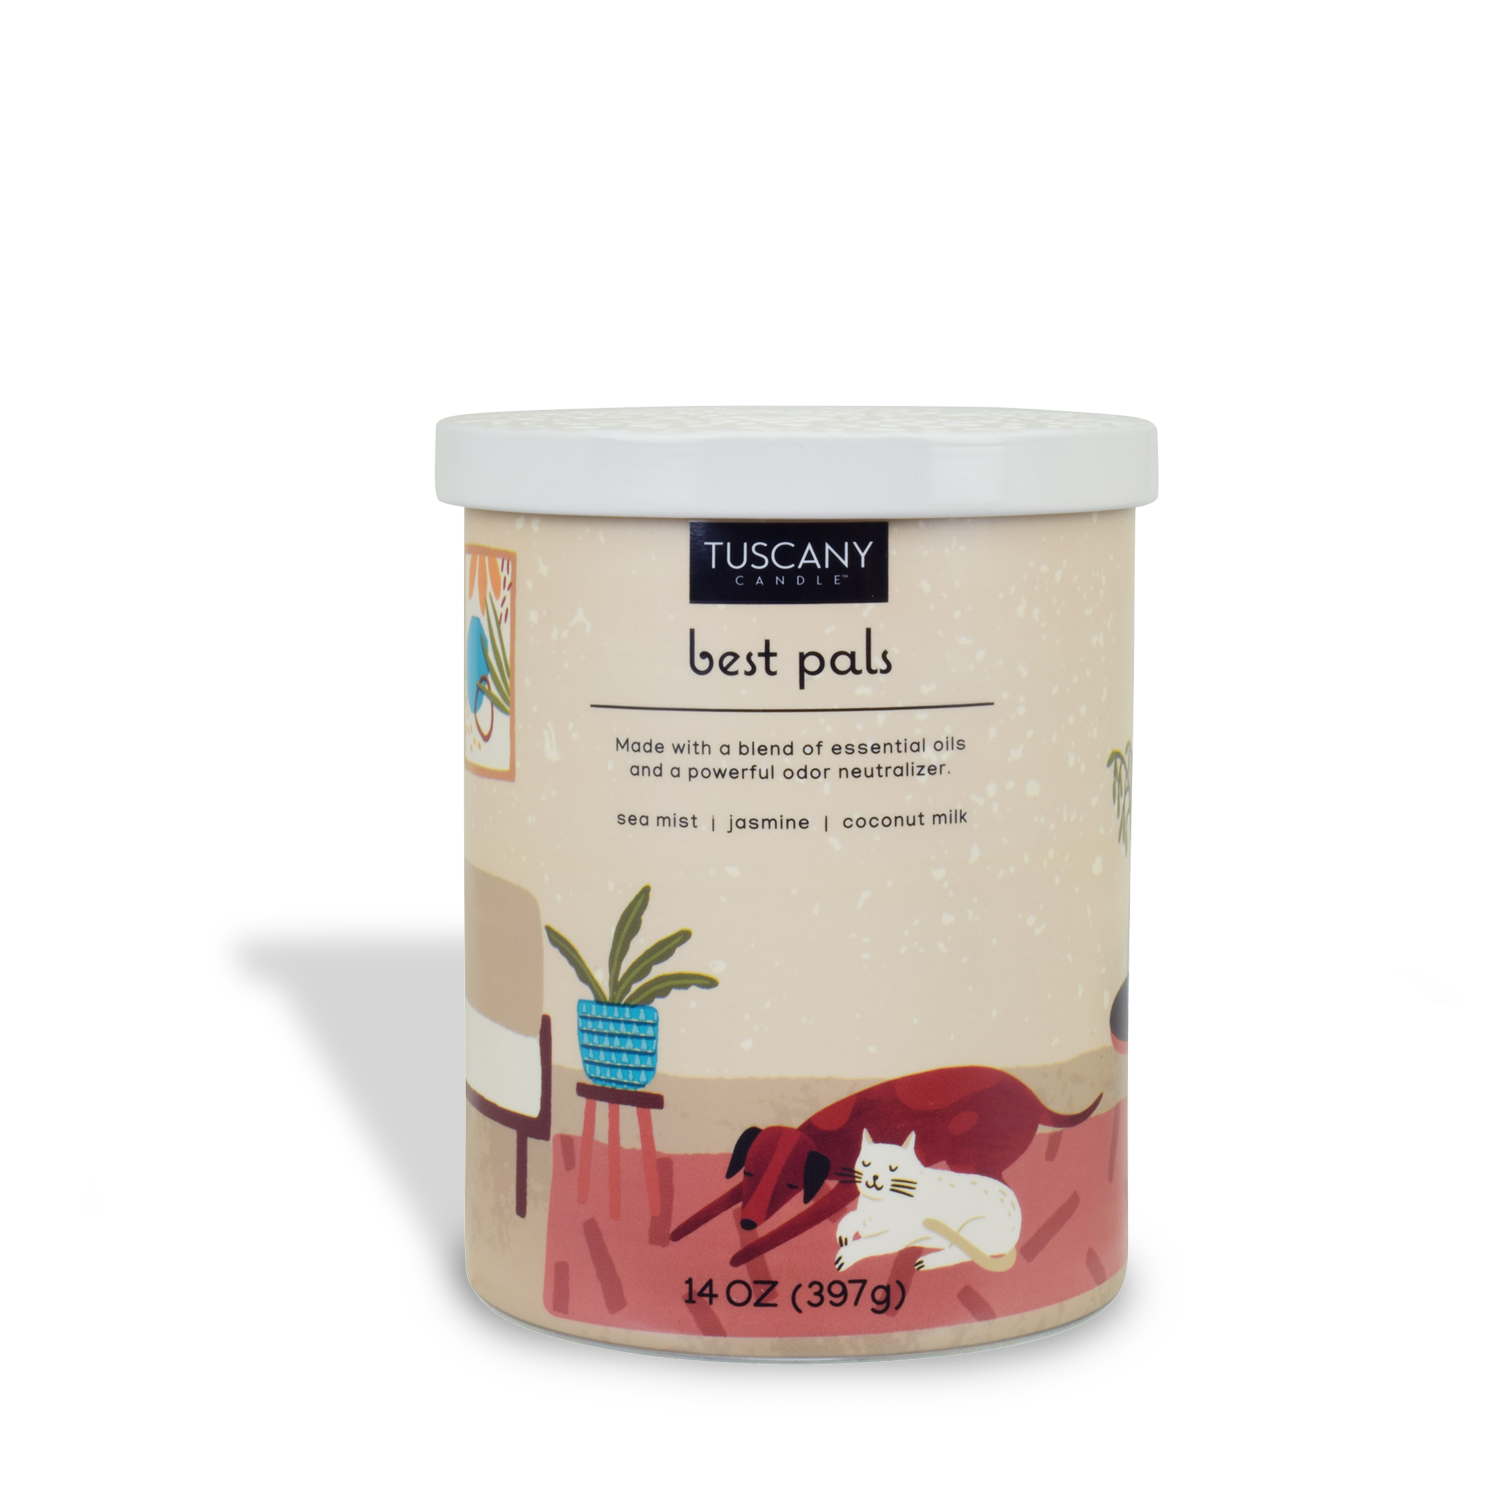 A scented canister of pet pads with a cat on it, the Best Pals Scented Jar Candle (14 oz) – Pet Odor Control Collection by Tuscany Candle.